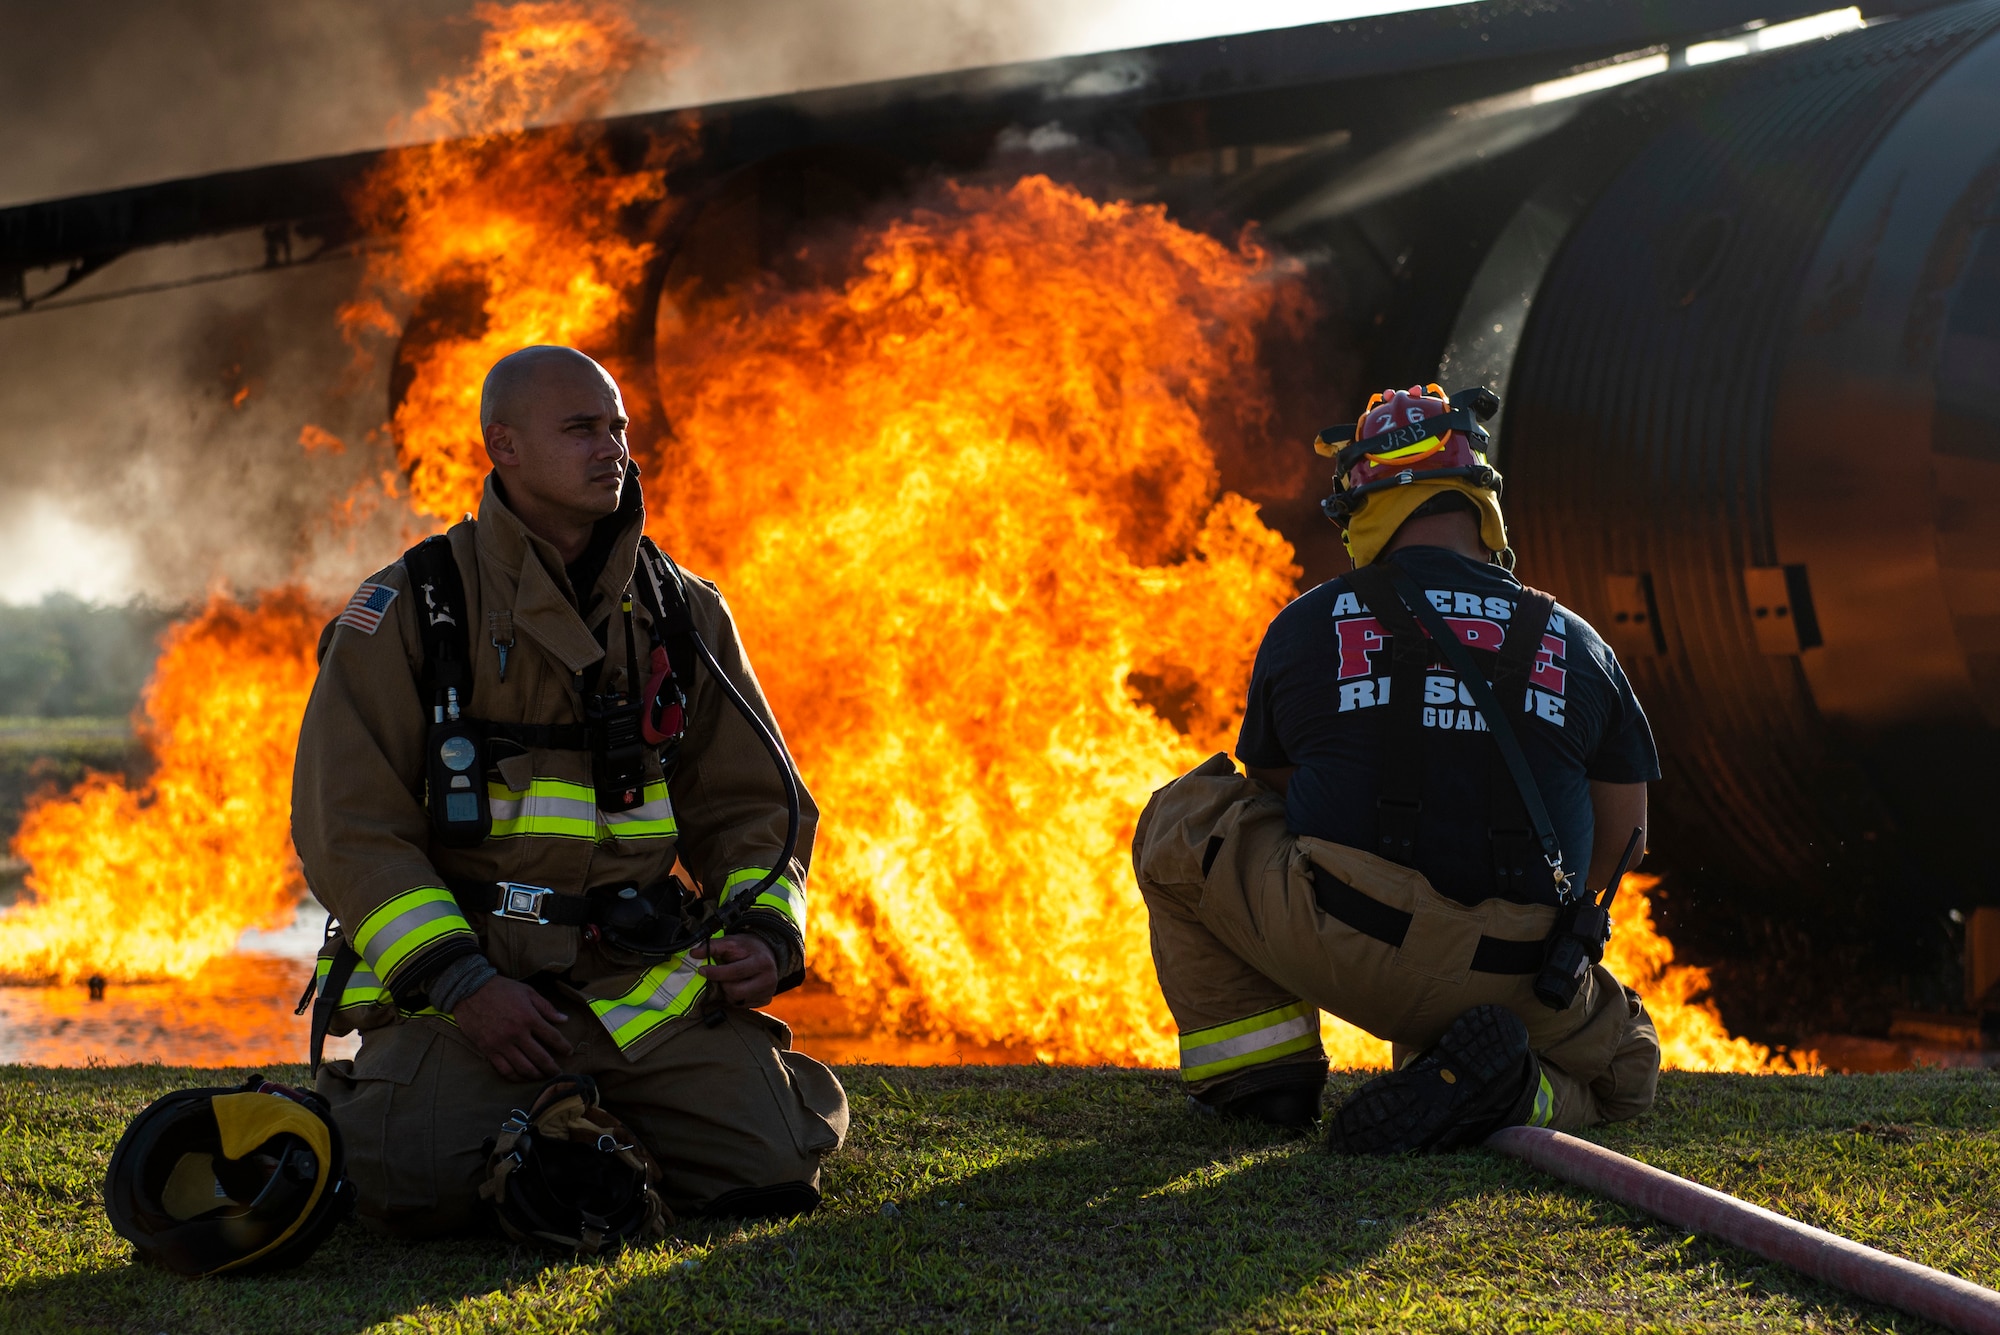 U.S. Air Force firefighters assigned to the 36th Civil Engineer Squadron, prepares to distinguish a fire during joint aircraft fire training at Andersen Air Force Base, Guam, May 11, 2021.